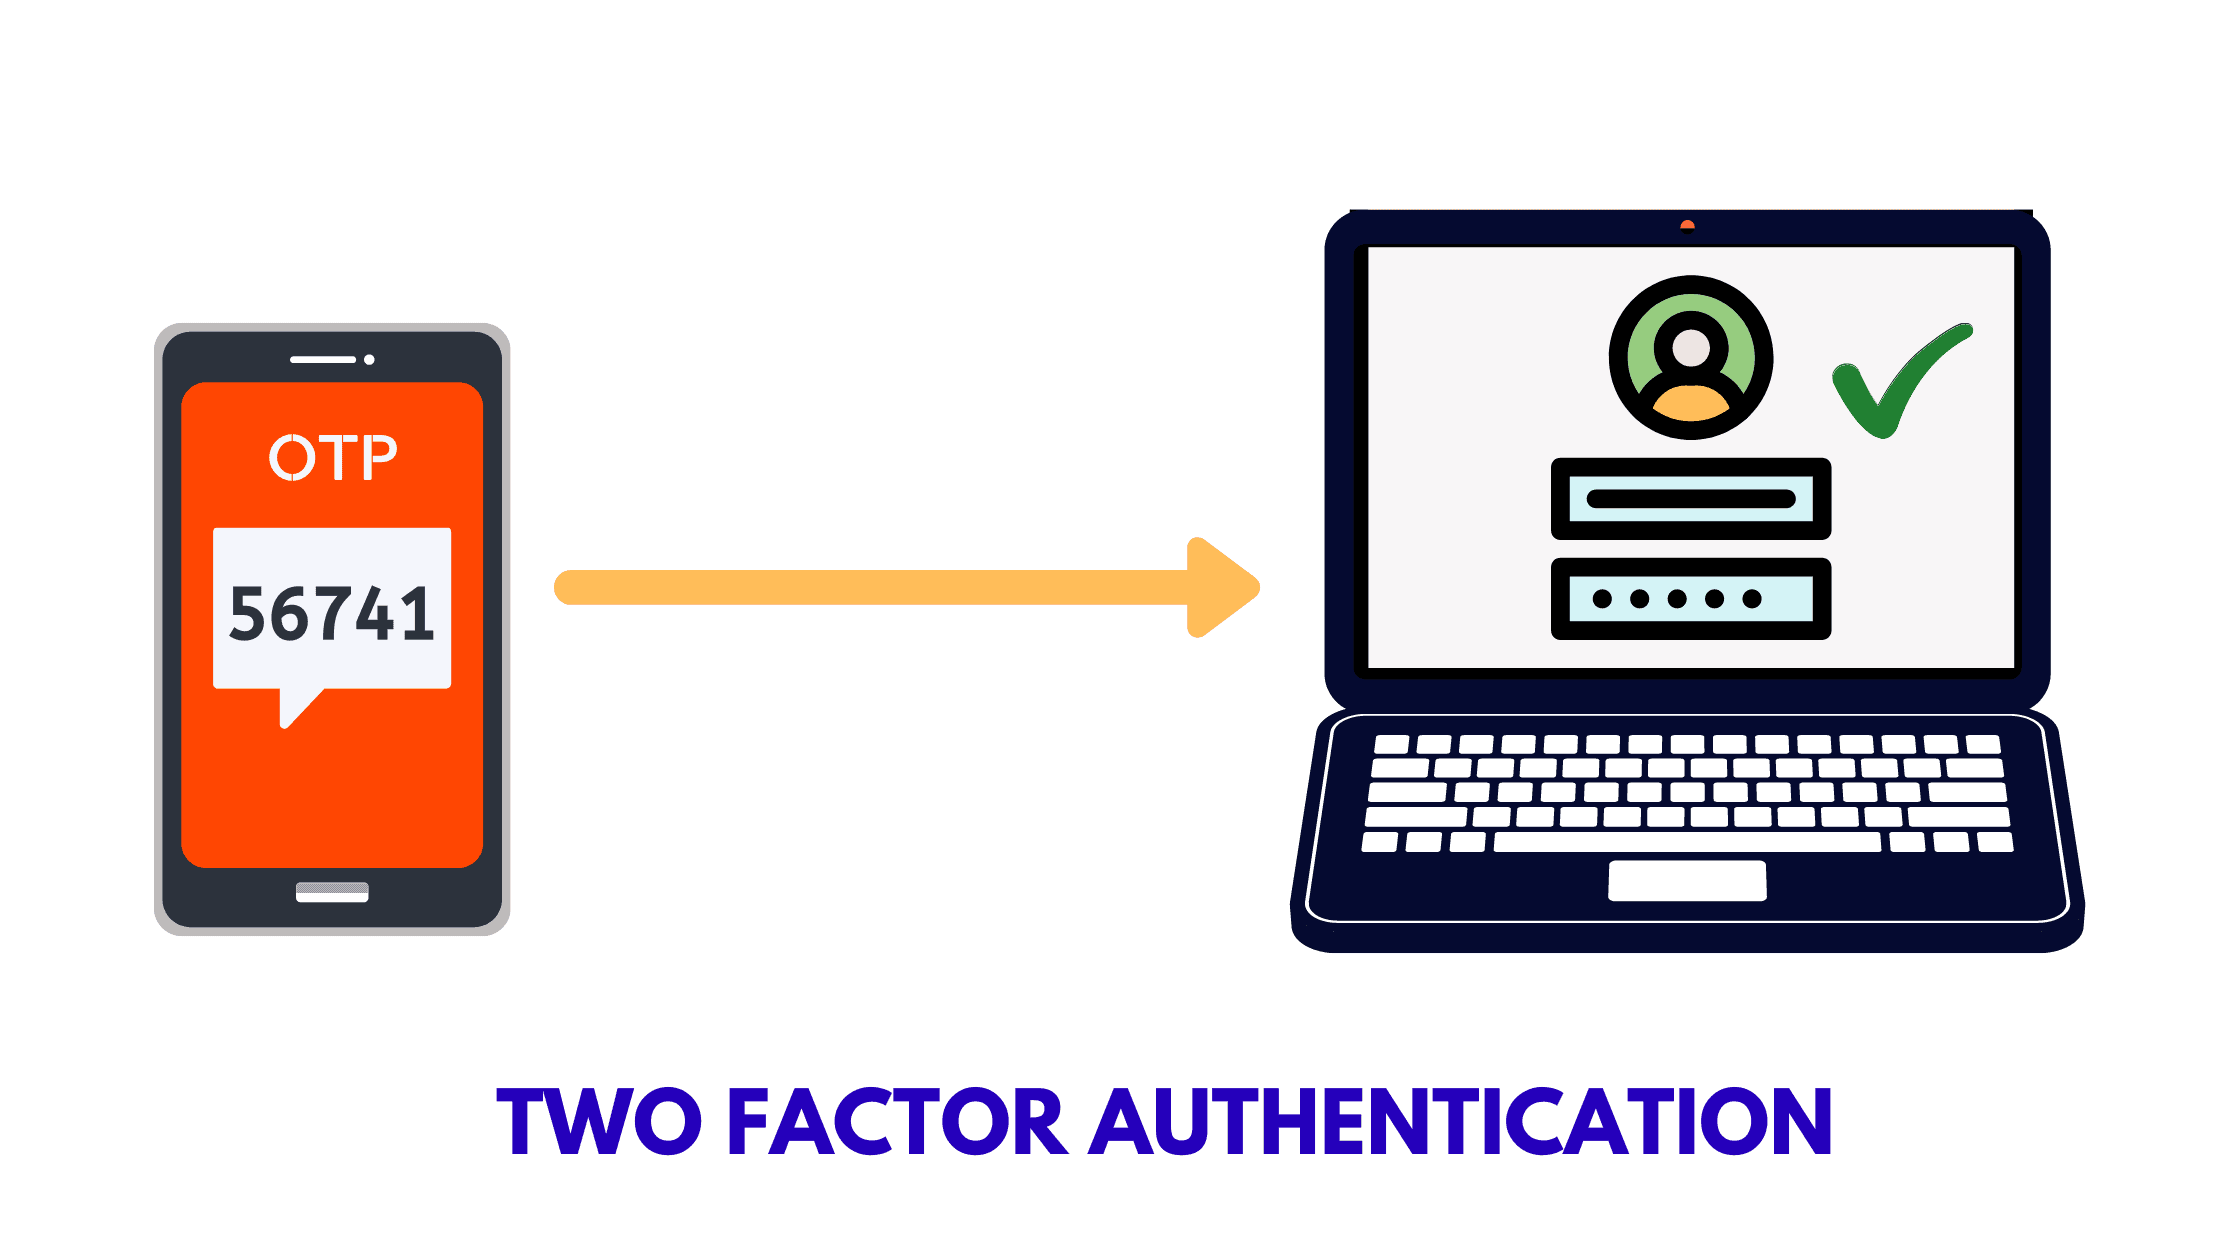 2FAS - the Internet's favorite open-source authenticator